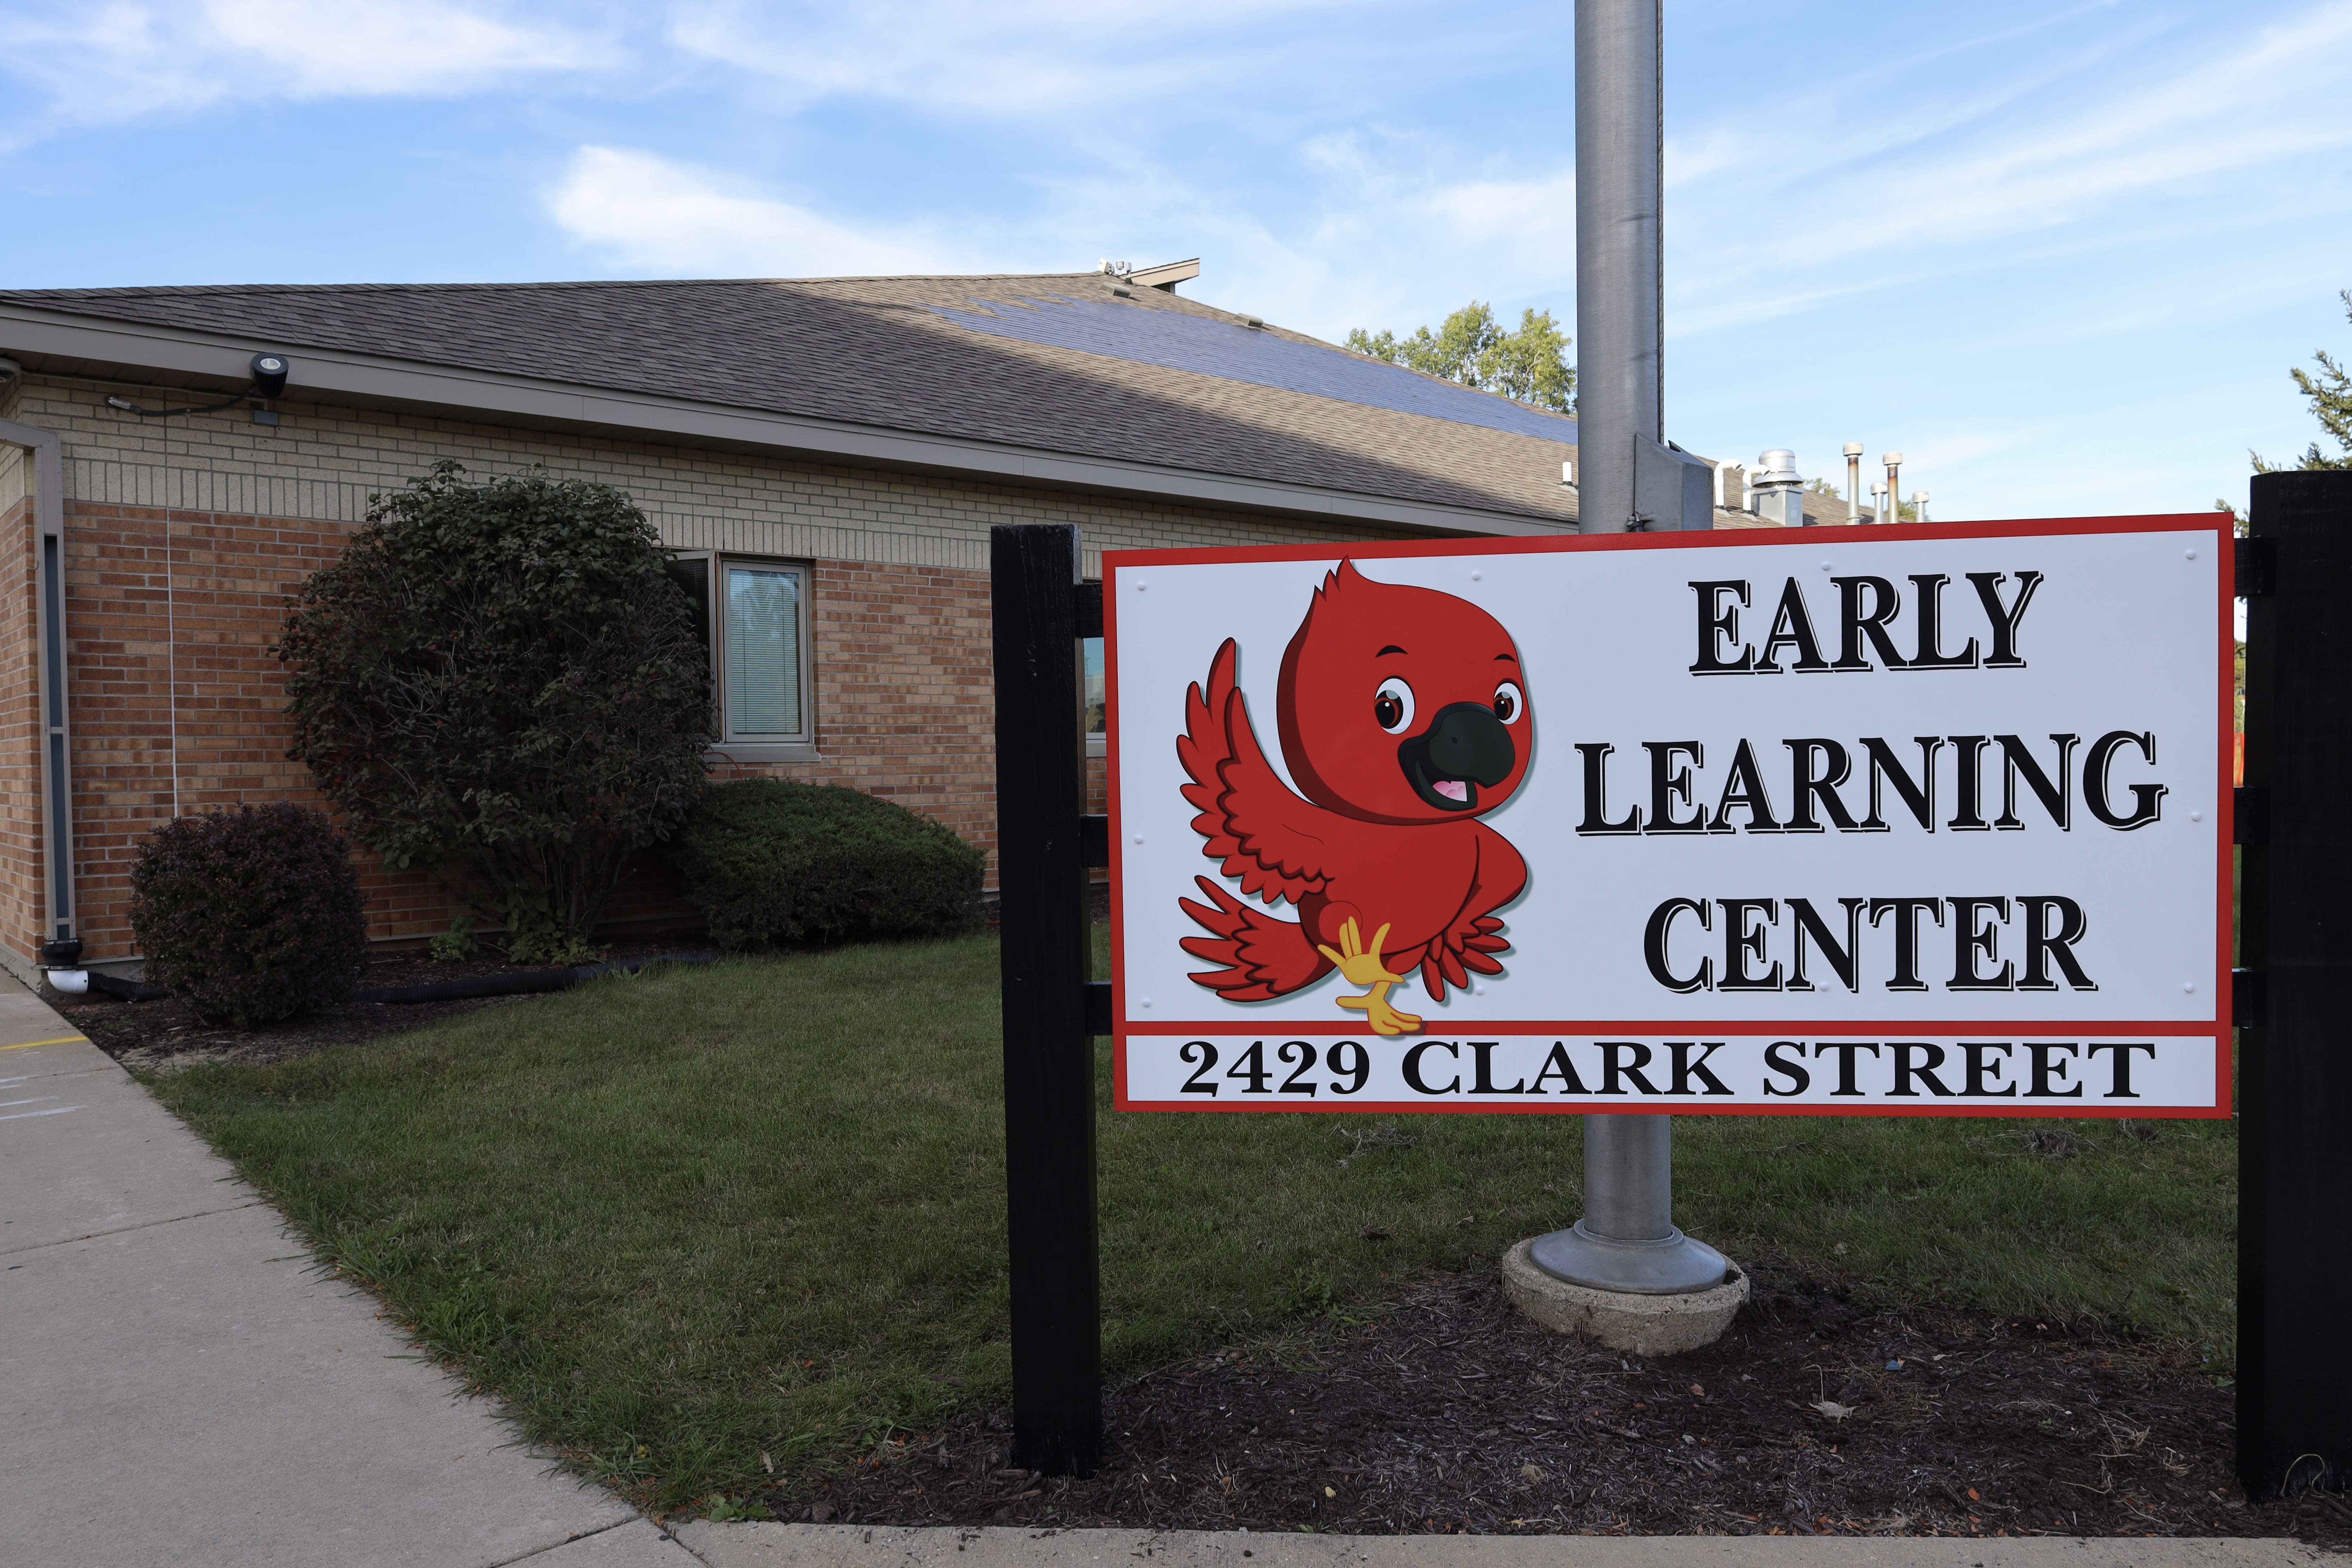 Early learning center